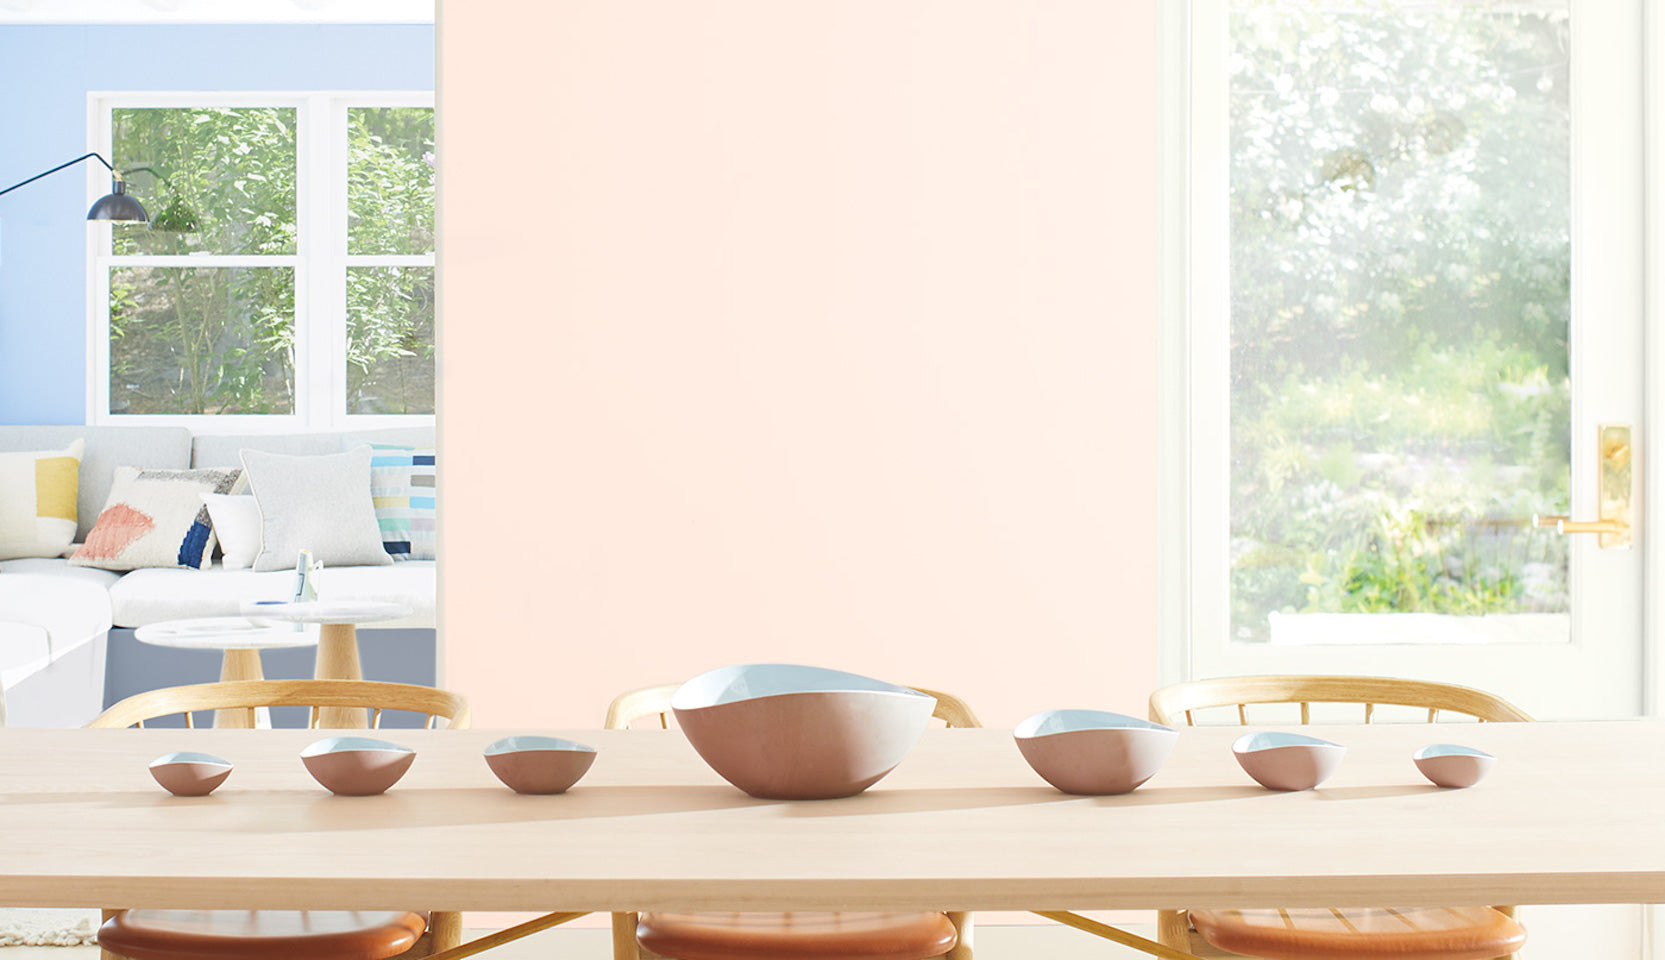 Light pink-painted dining room walls with a long wooden table, matching chairs and bench seating.